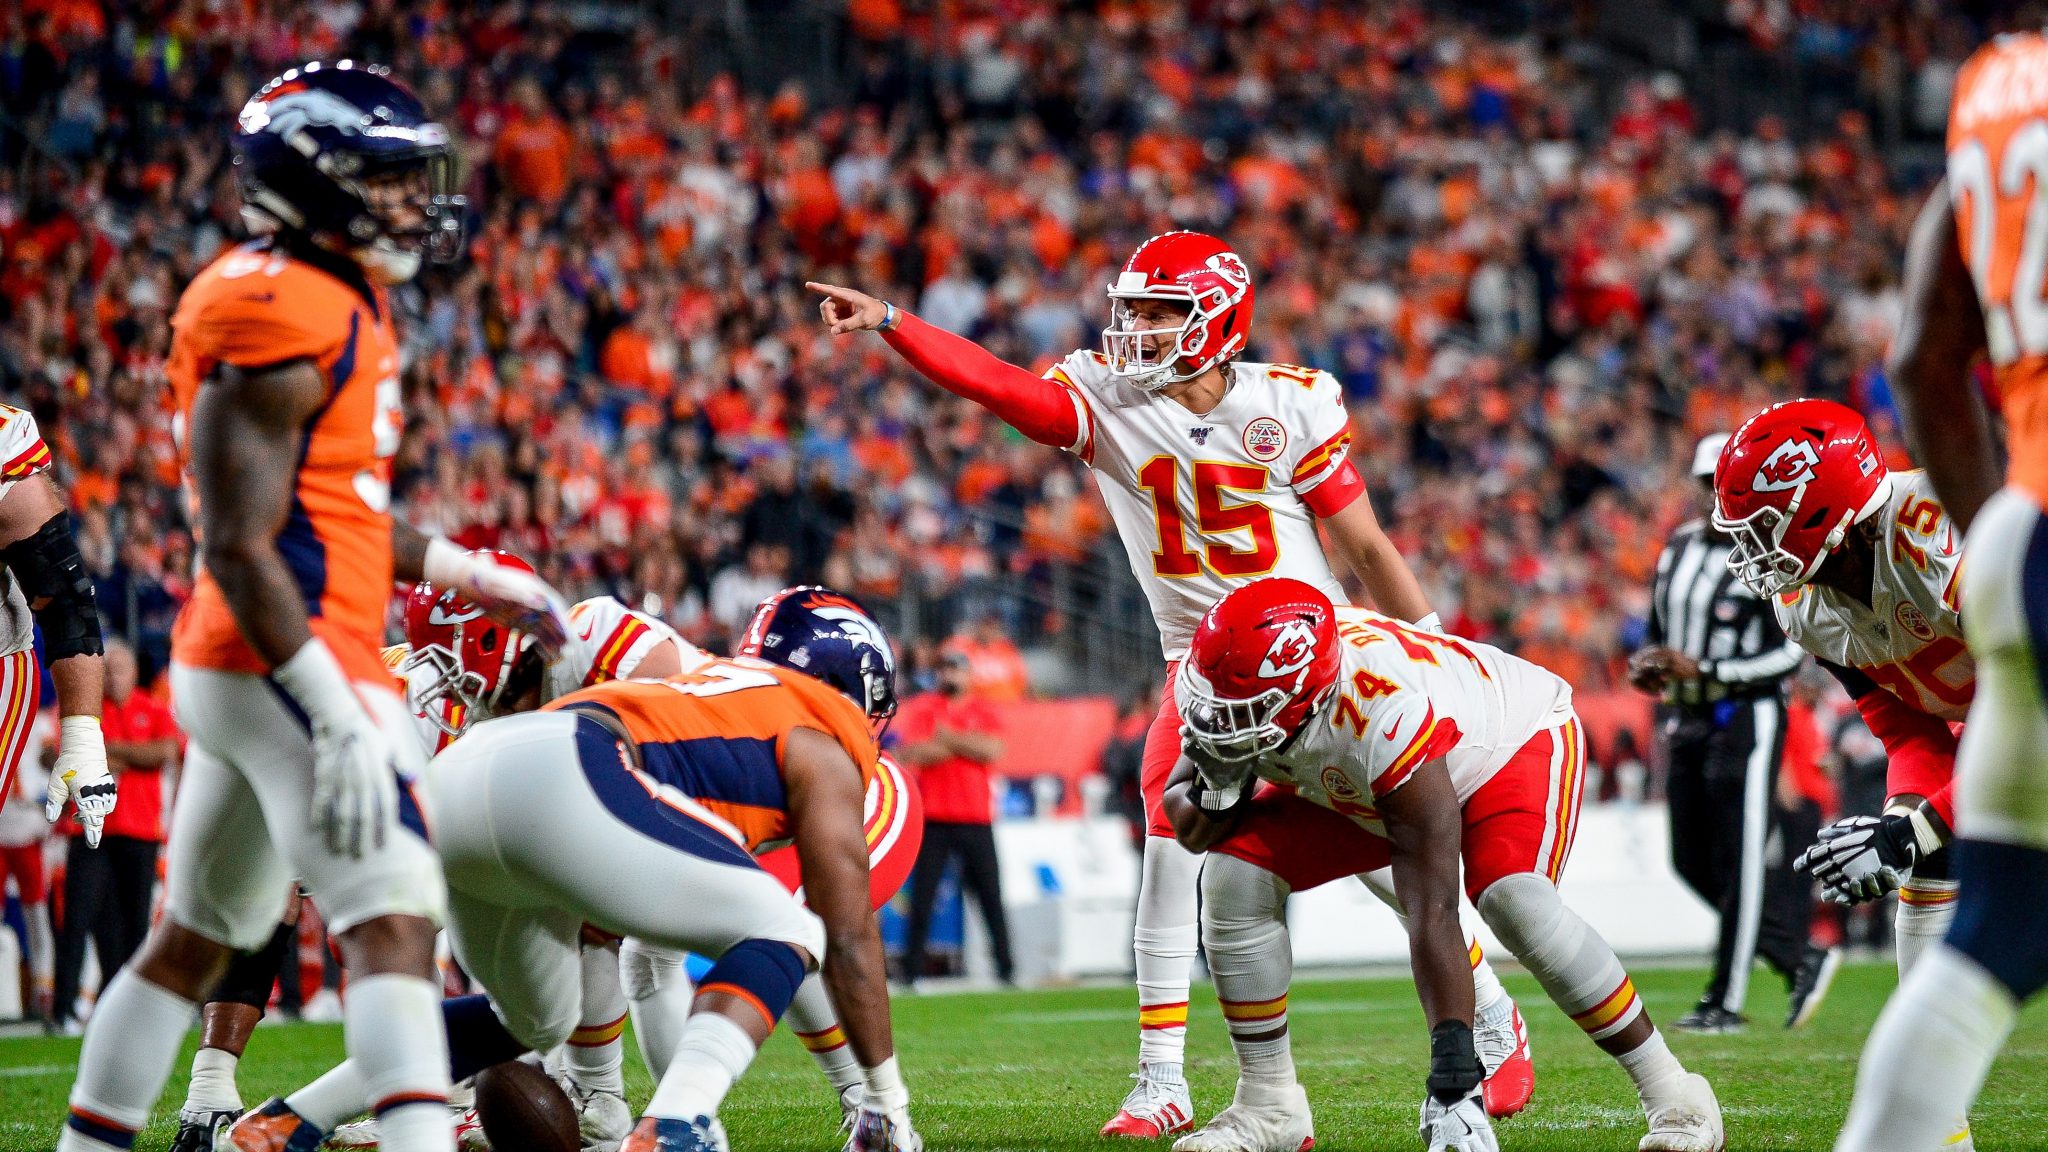 Chiefs vs Broncos live stream how to watch NFL week 7 online from